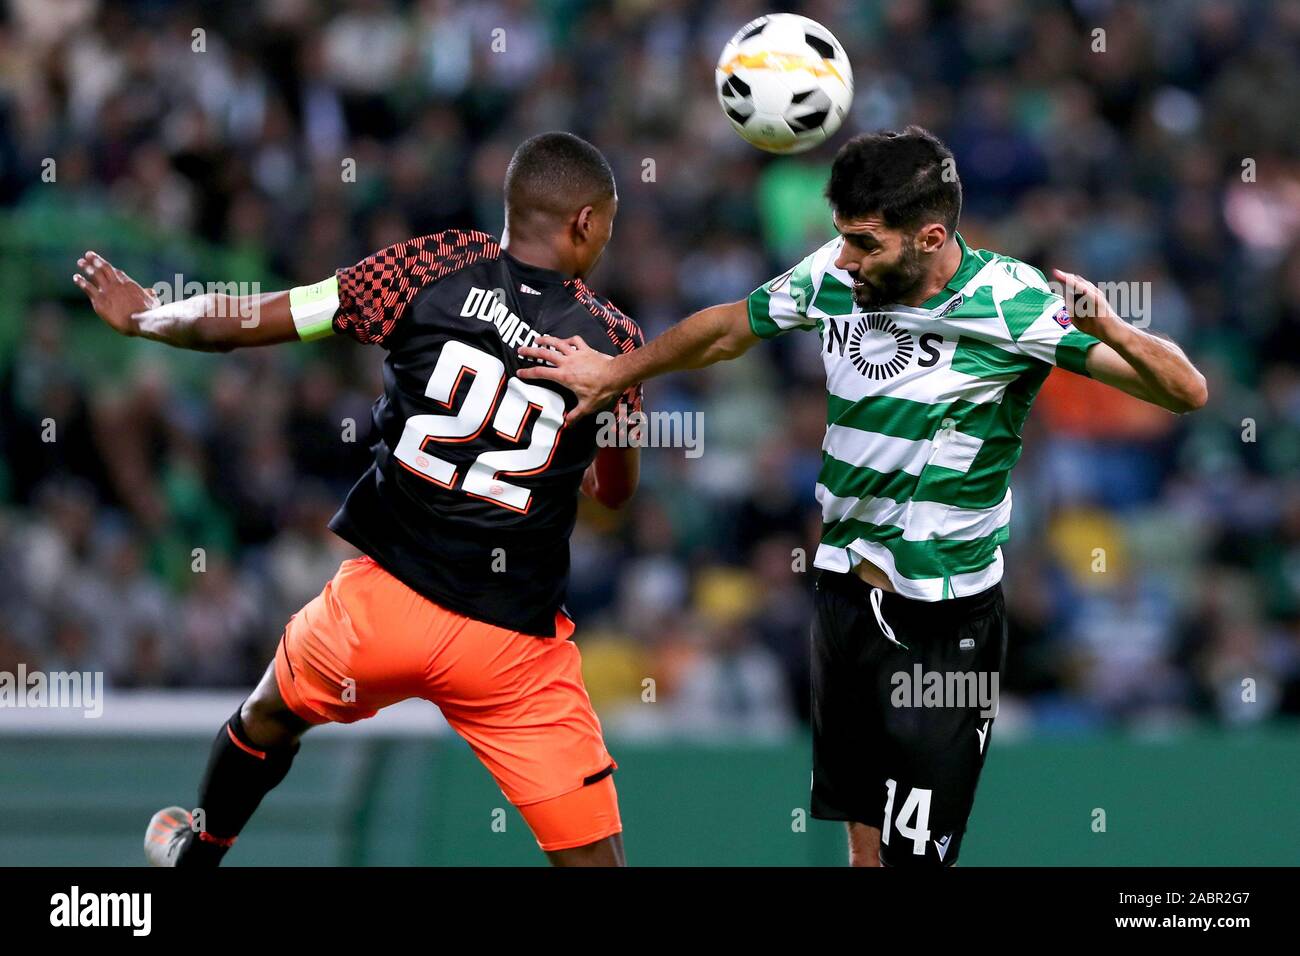 Lisbon, Portugal. 28th Nov, 2019. Luis Neto (R) of Sporting CP vies with Denzel Dumfries of PSV Eindhoven during the UEFA Europa League Group D football match at Alvalade stadium in Lisbon, Portugal, on Nov. 28, 2019. Sporting CP won 4-0. Credit: Pedro Fiuza/Xinhua/Alamy Live News Stock Photo